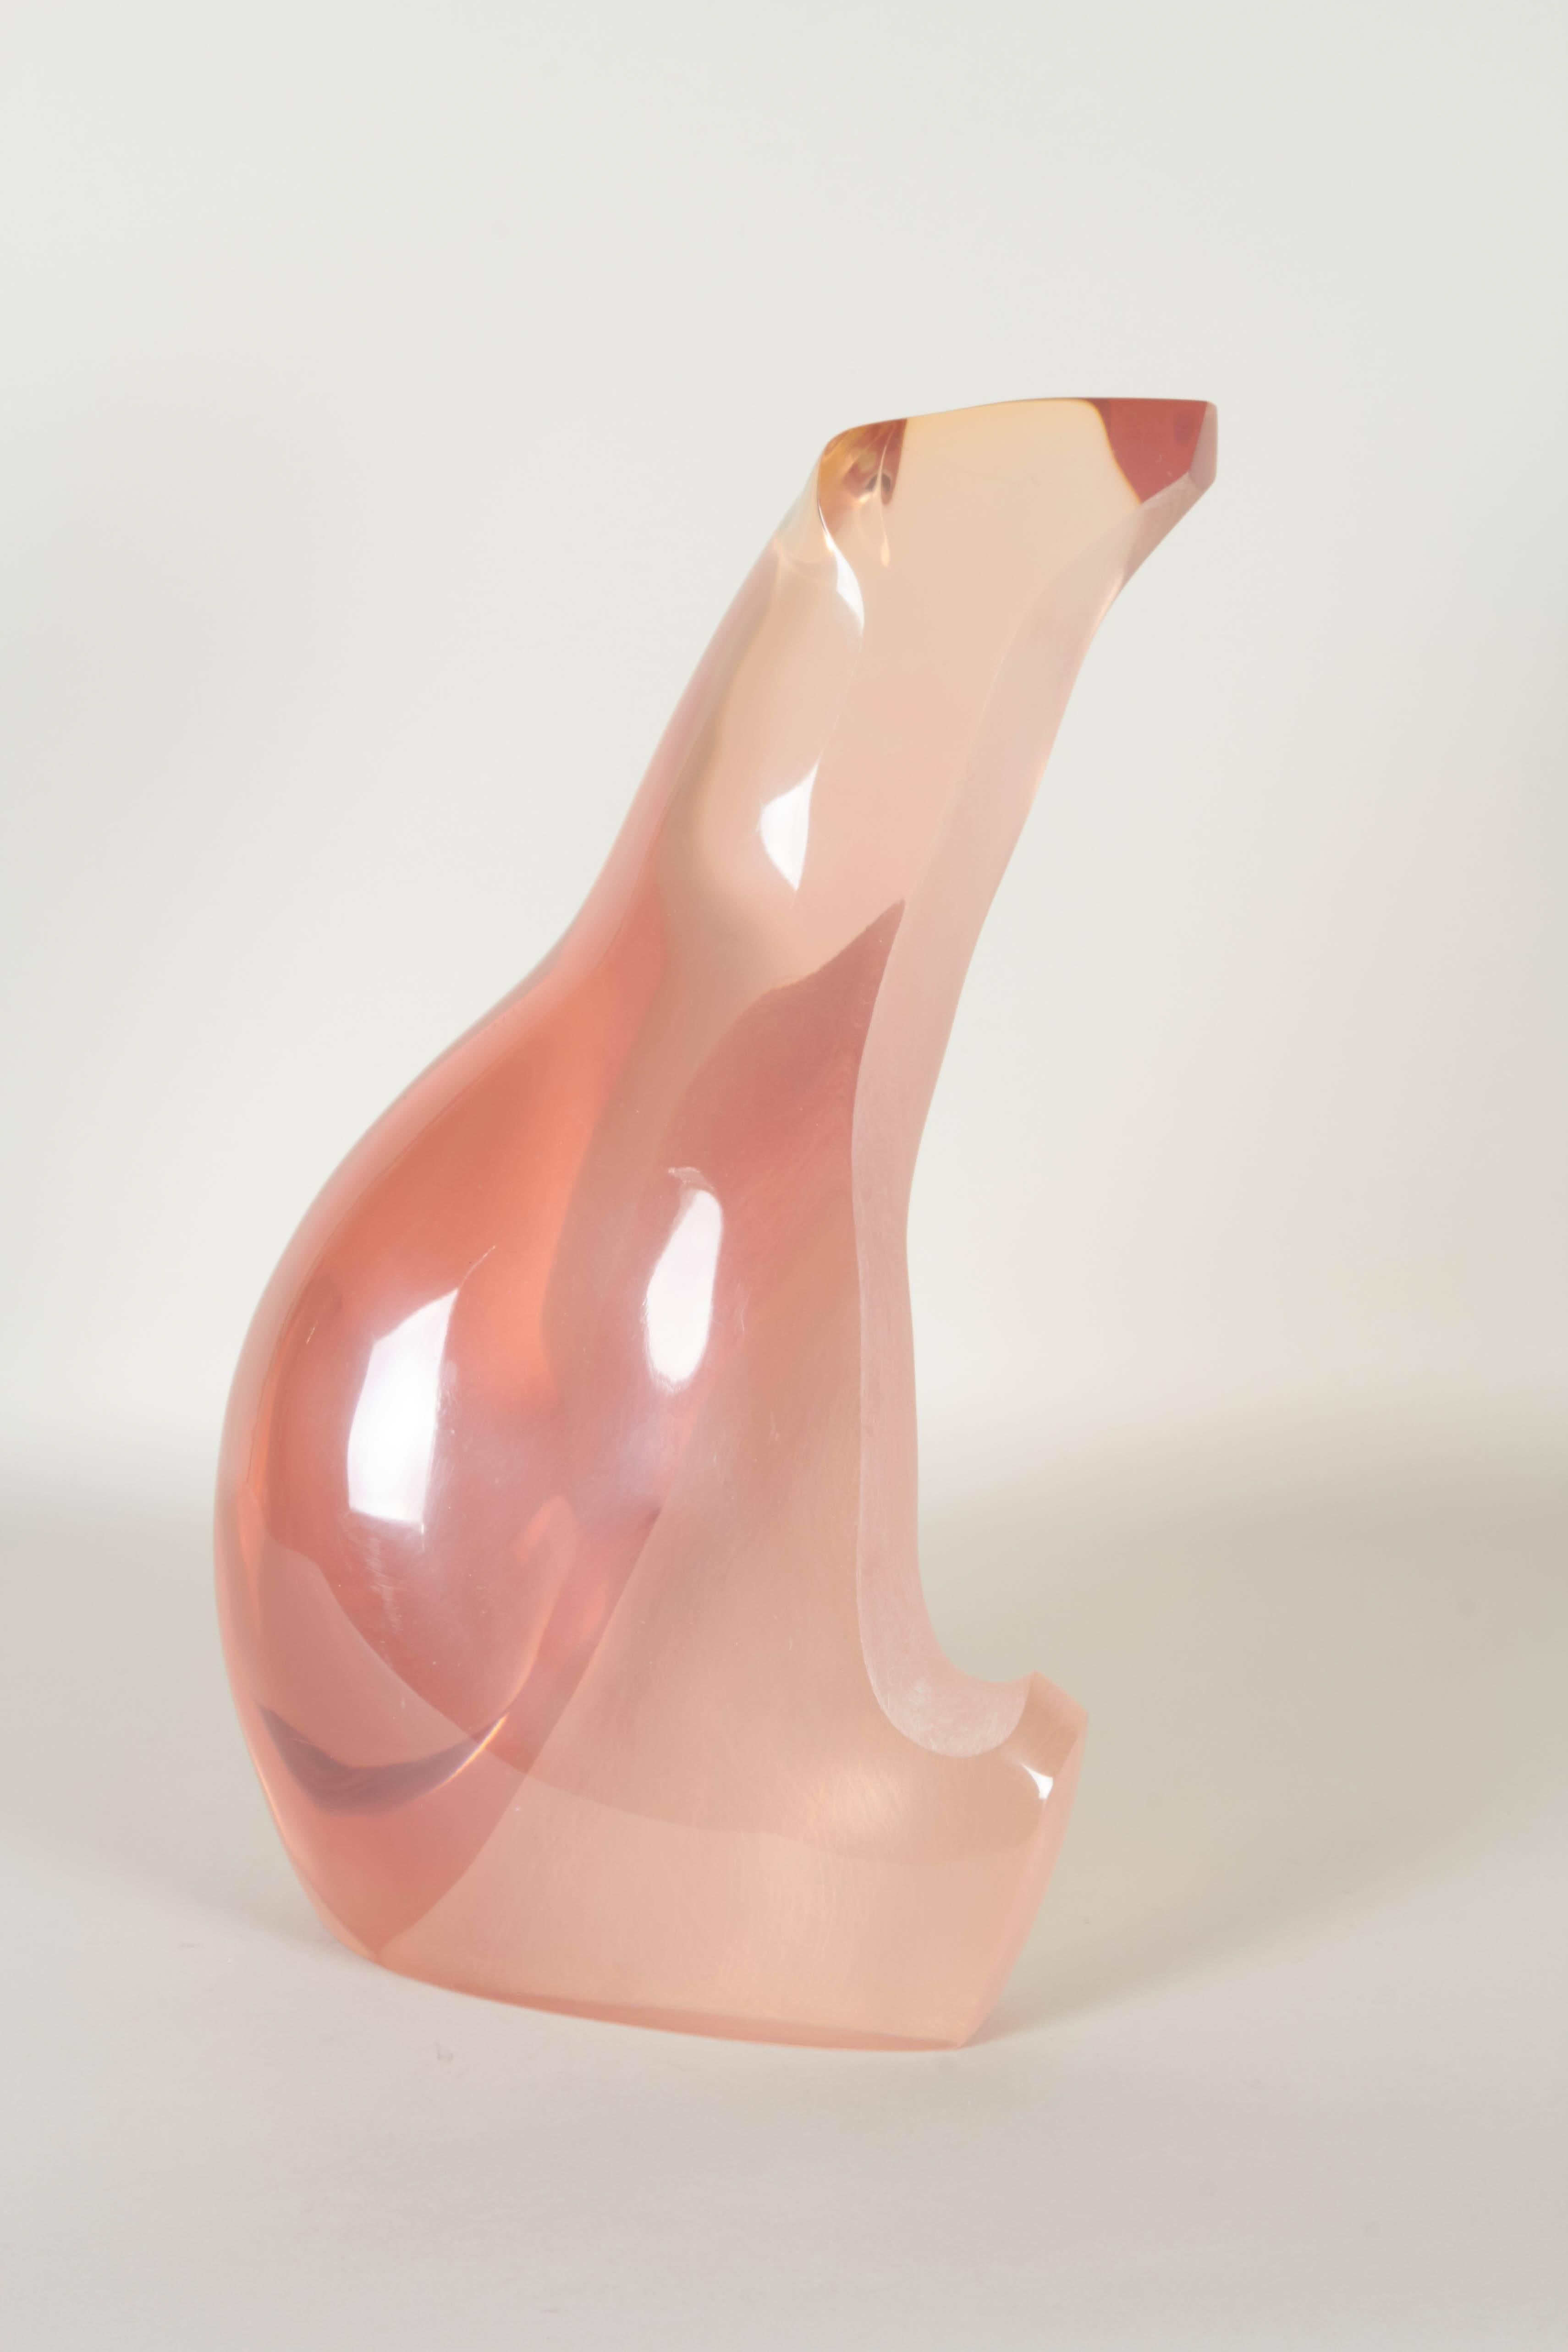 Frosted Louis Von Koelnau 'Seated Bear' in Pink Lucite, Signed and Dated